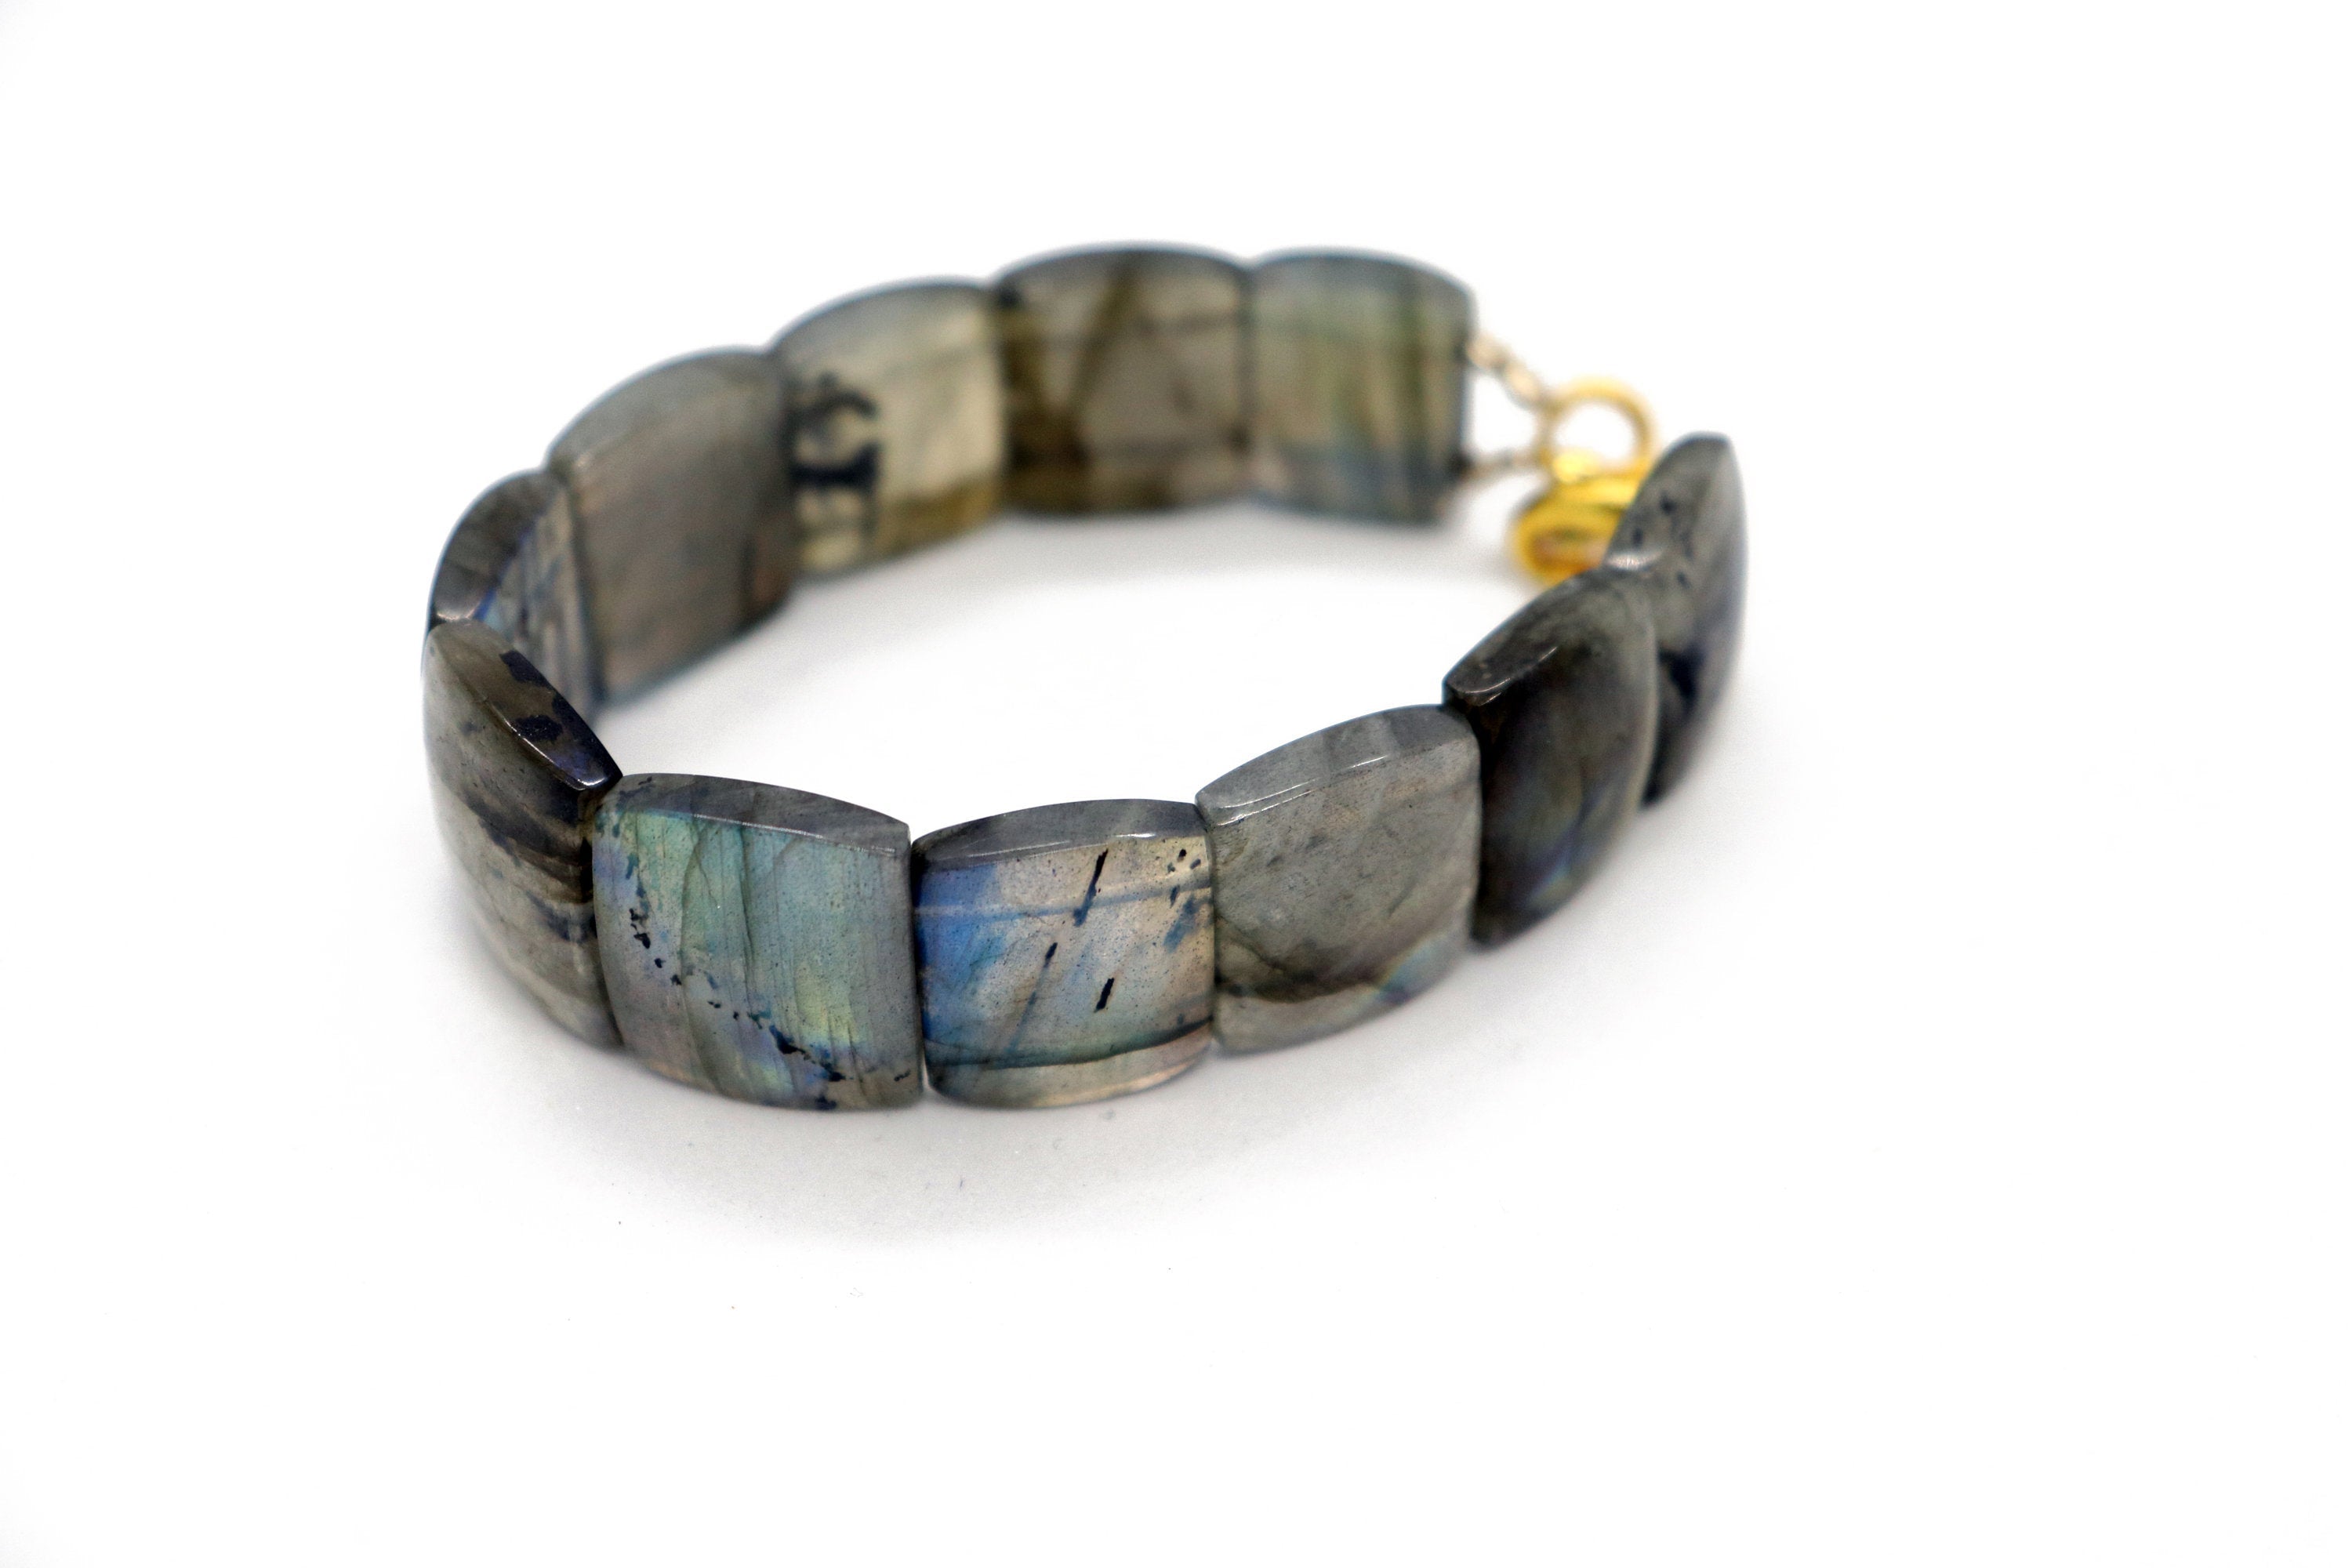 Labradorite gemstone Bracelet with Blue and Yellow Flash, Labradorite Bracelet, Gemstone bracelet gift for her, gift for him 6 inch Beadsforyourjewelry